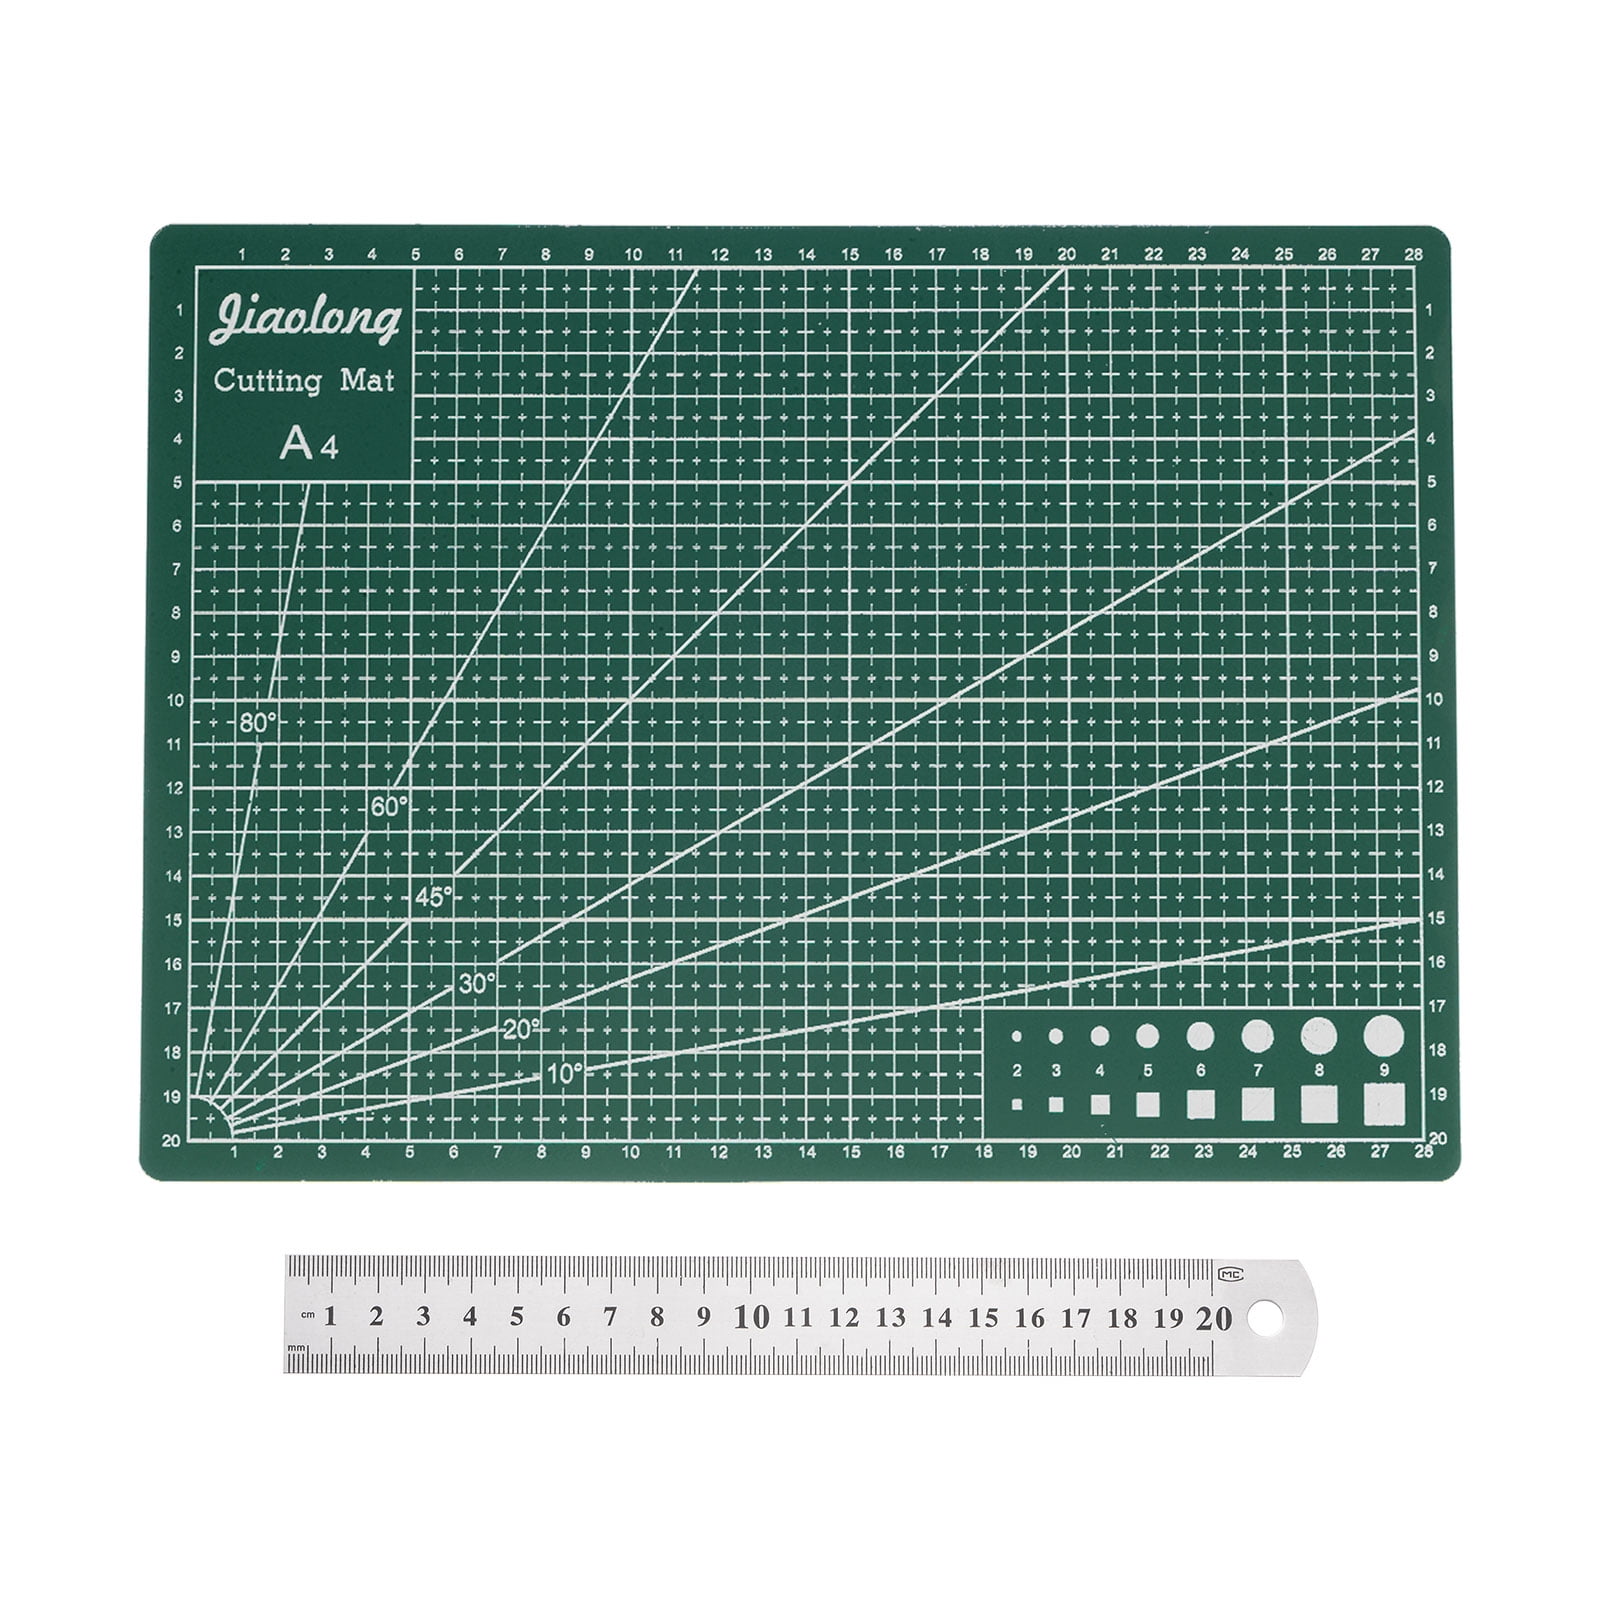 A3 Cutting Mat 18 x 12 Grey Craft Mat Non-Slip Cutting Board with 8  Stainless Steel Ruler for Sewing Quilting